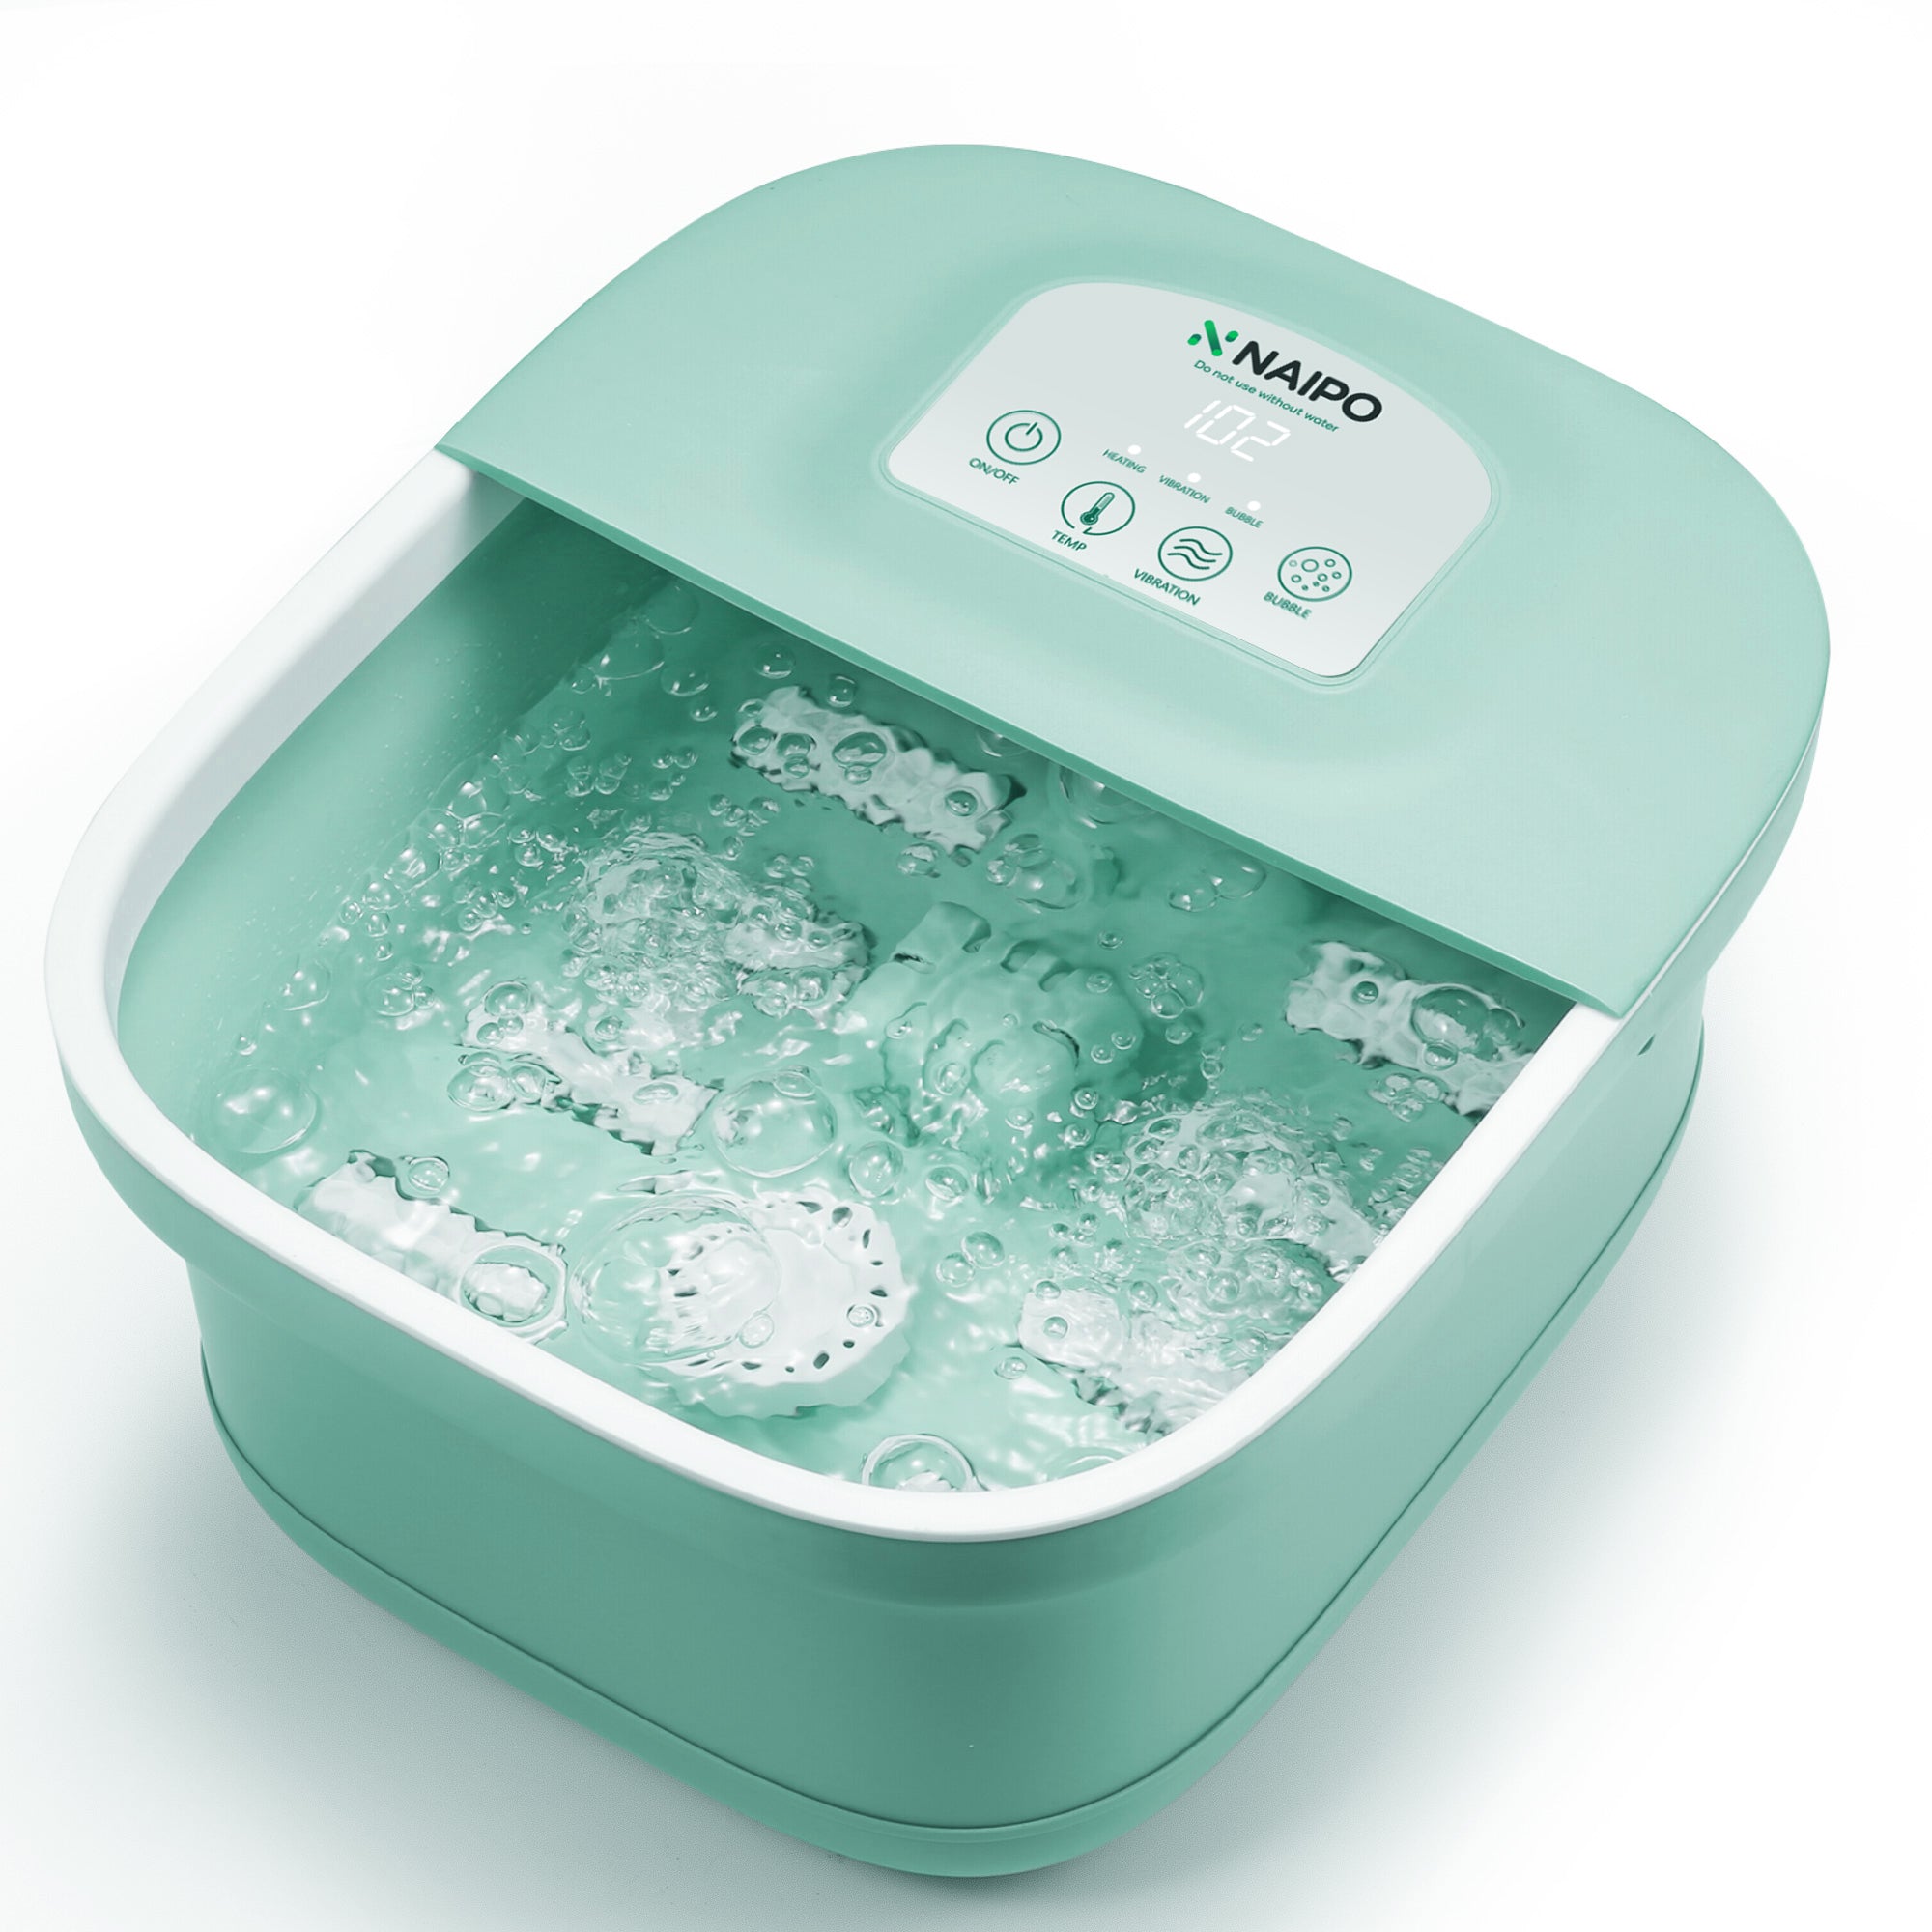 Load image into Gallery viewer, Naipo Foot Spa Bath Massager with Fast Heating, Rich Bubble, Vibration, Rollers, Button Control, Lower Noise - Green
